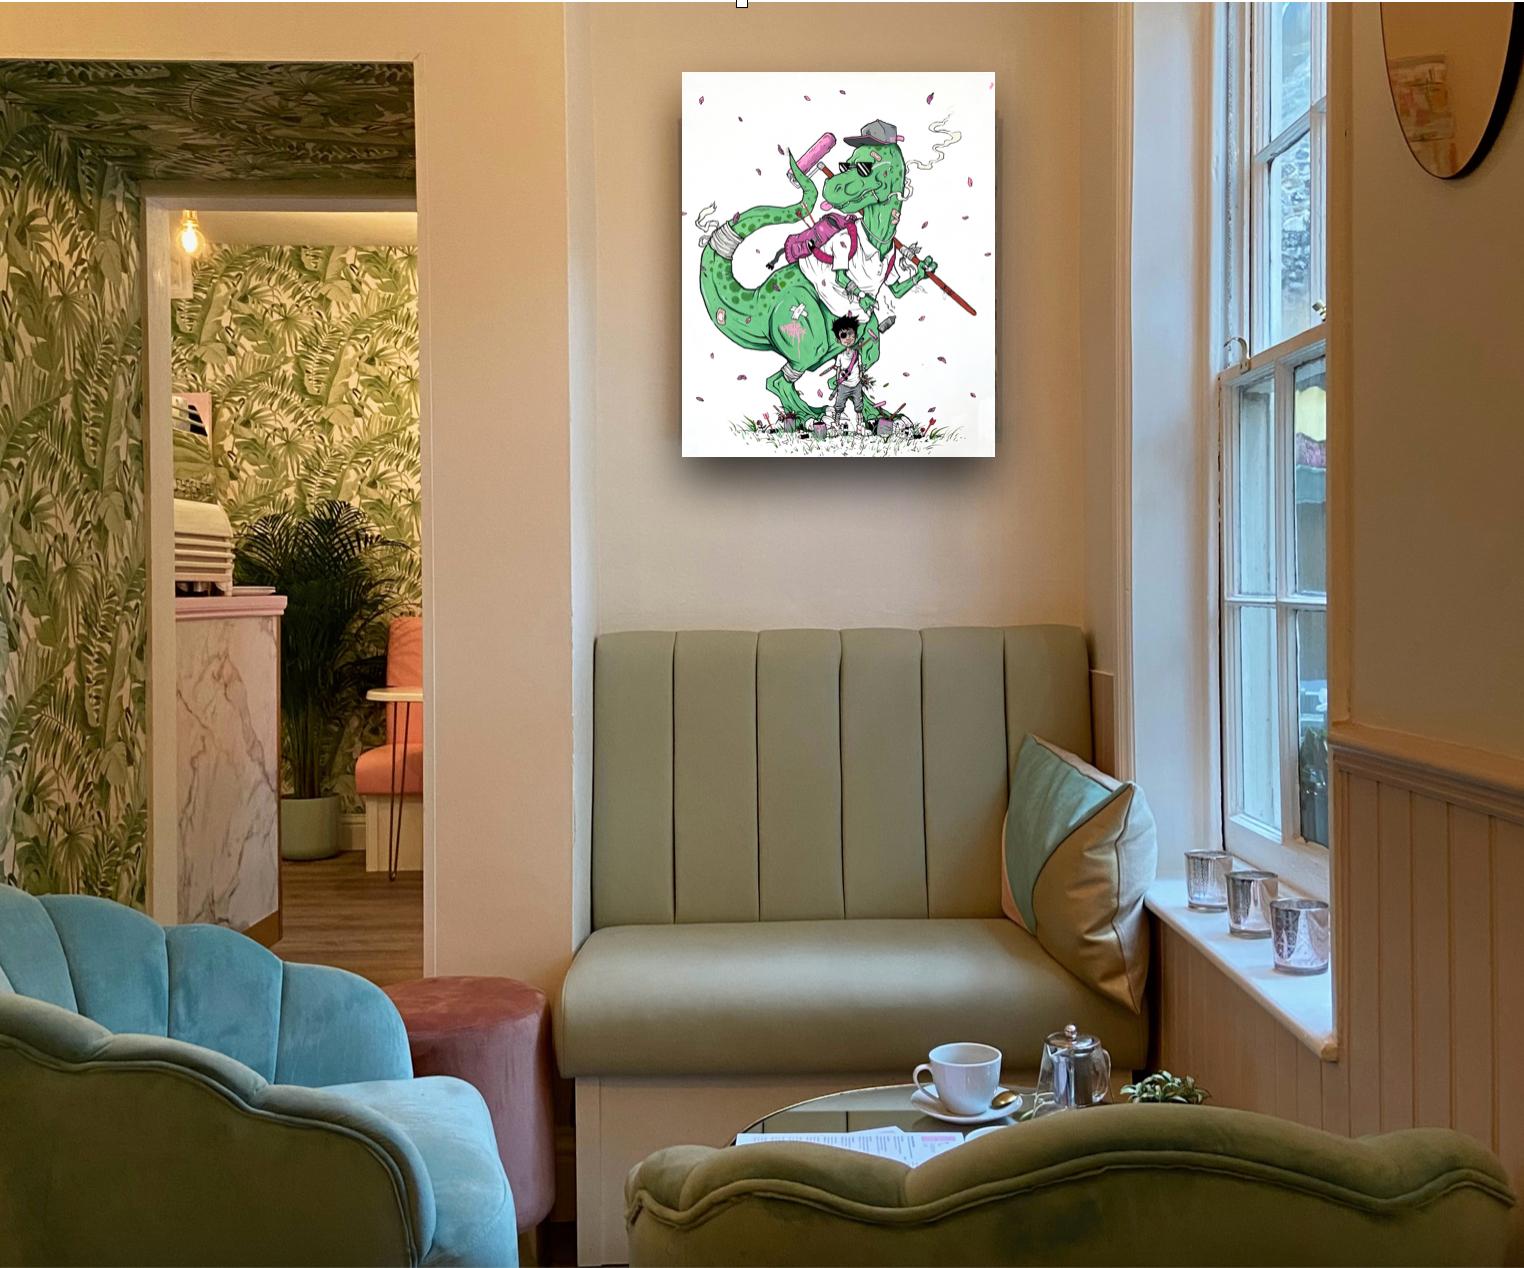 LET ME TELL YA BOUT MY BEST FRIEND-unique street art painting in green and white - Green Figurative Painting by Ian Sullivan